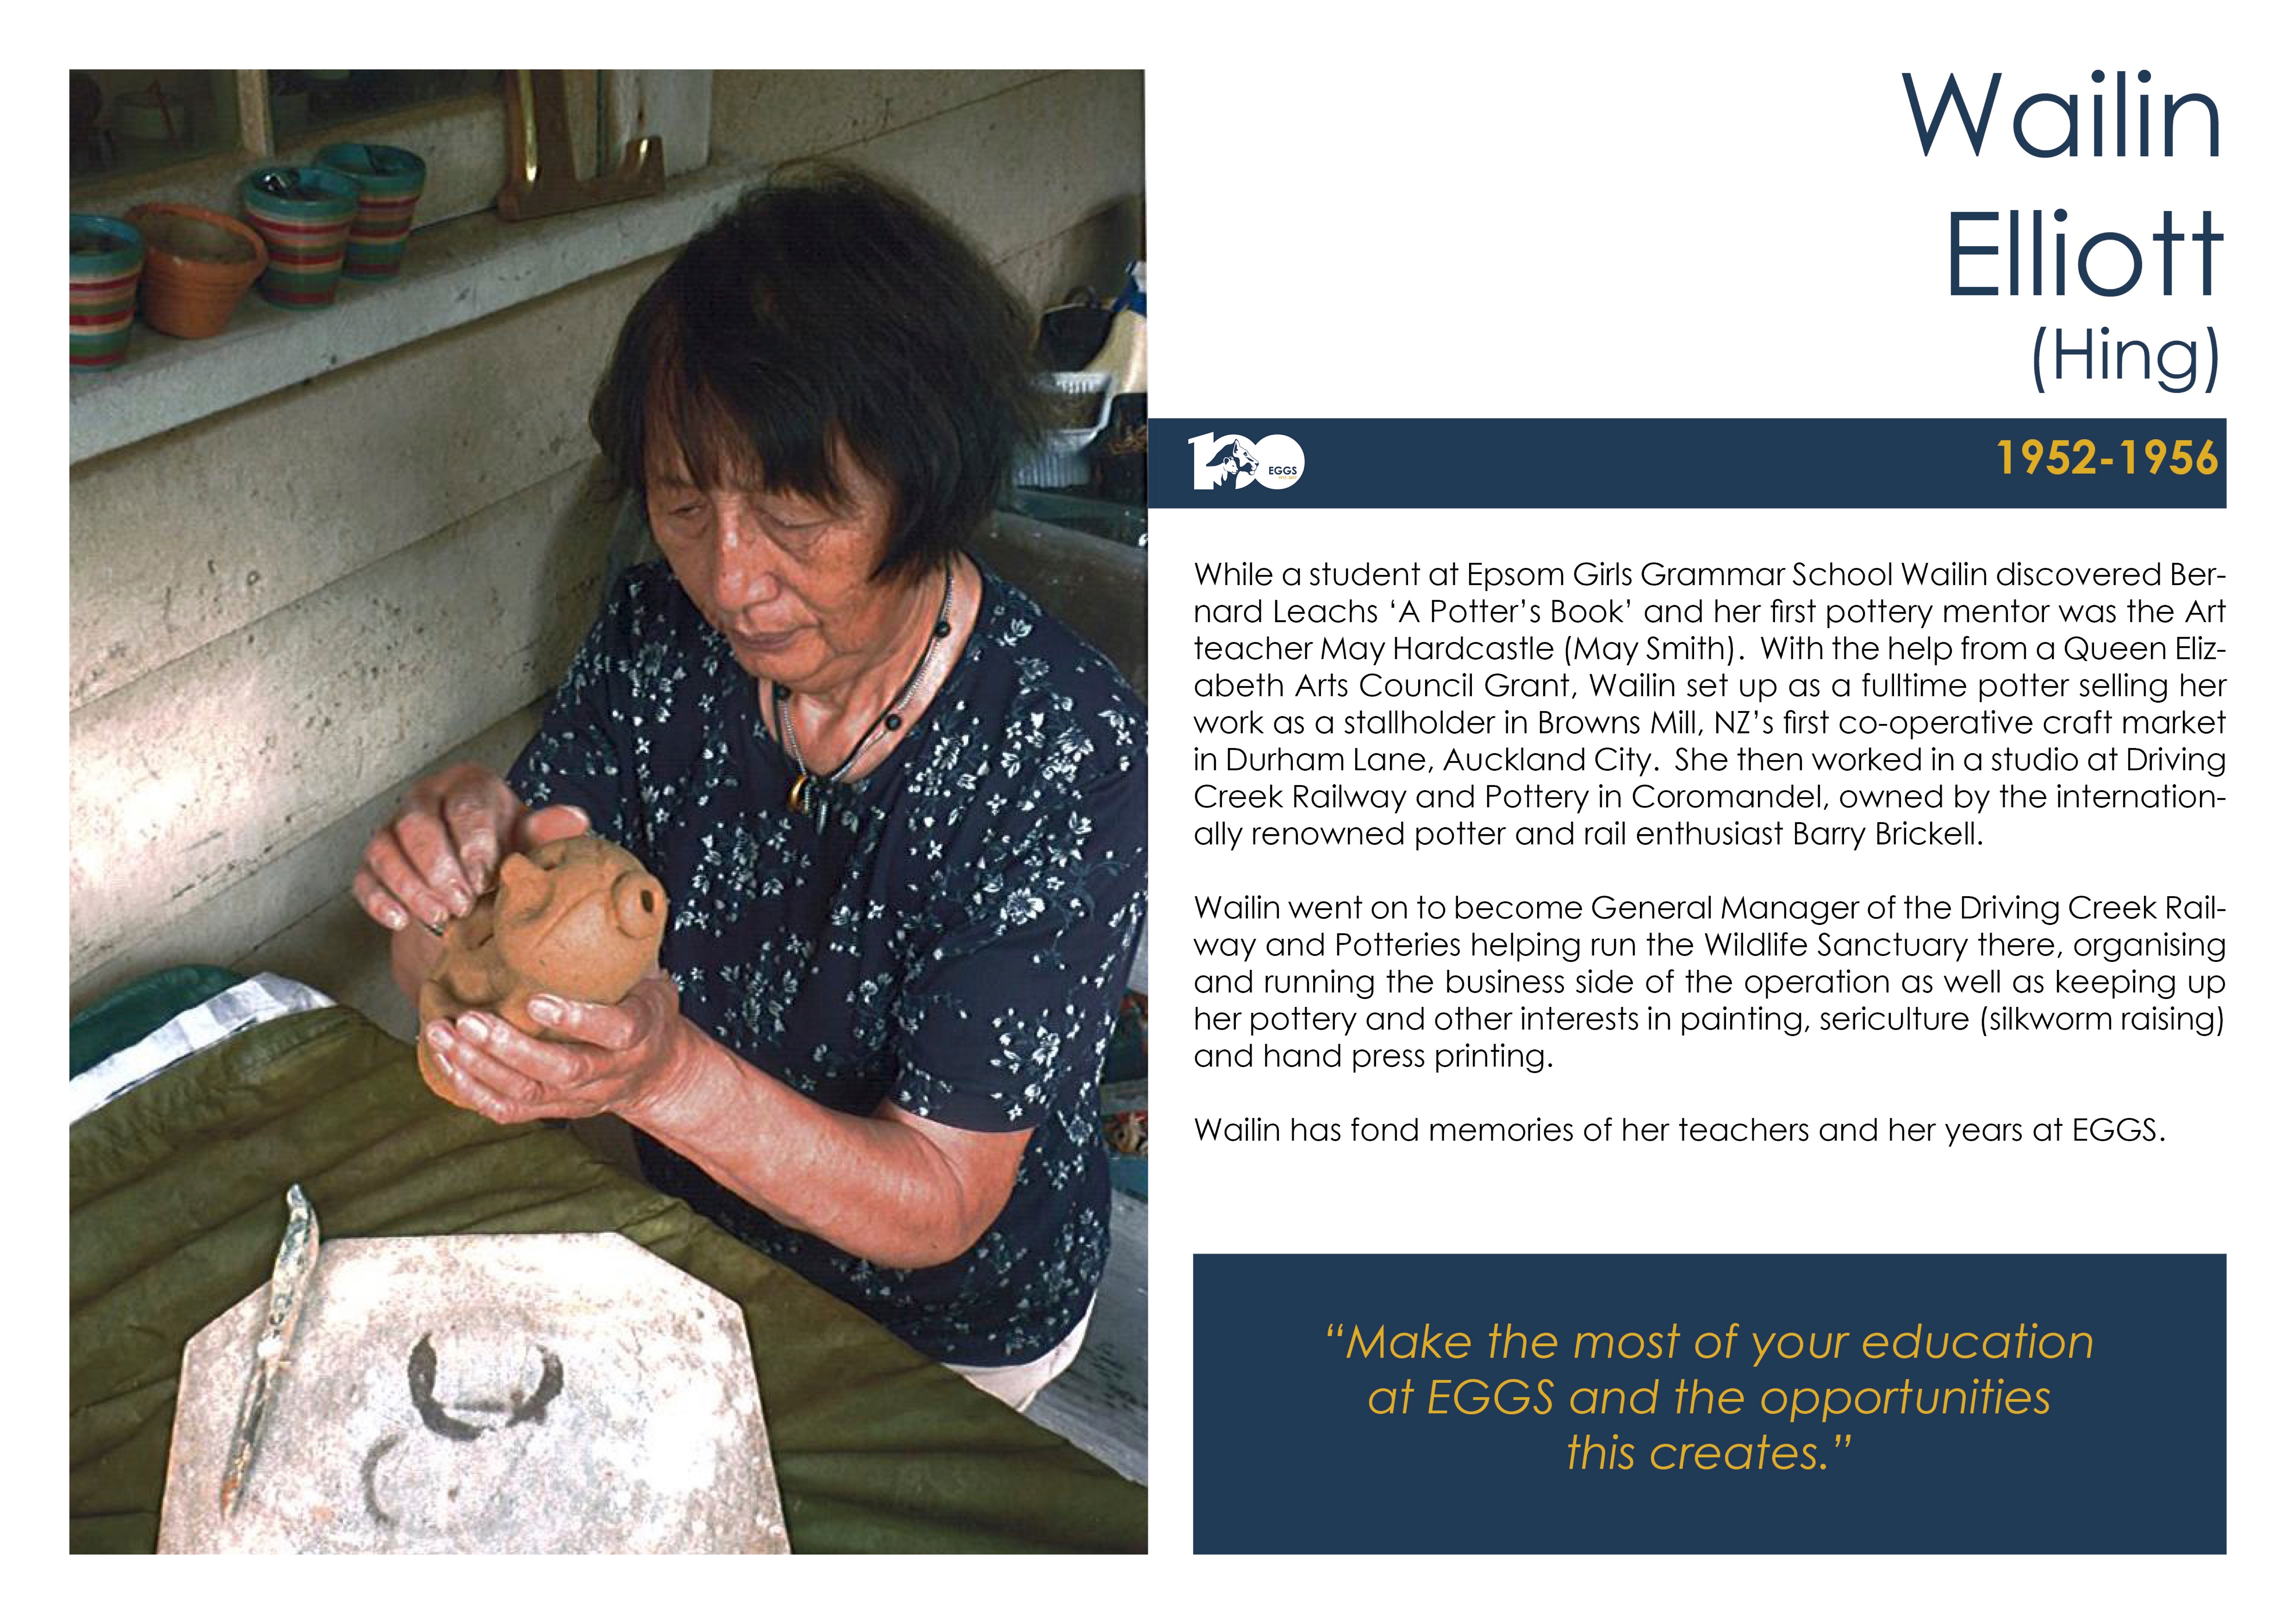 Short text about Wailin Elliott next to a photo of her sculpting a clay figurine.